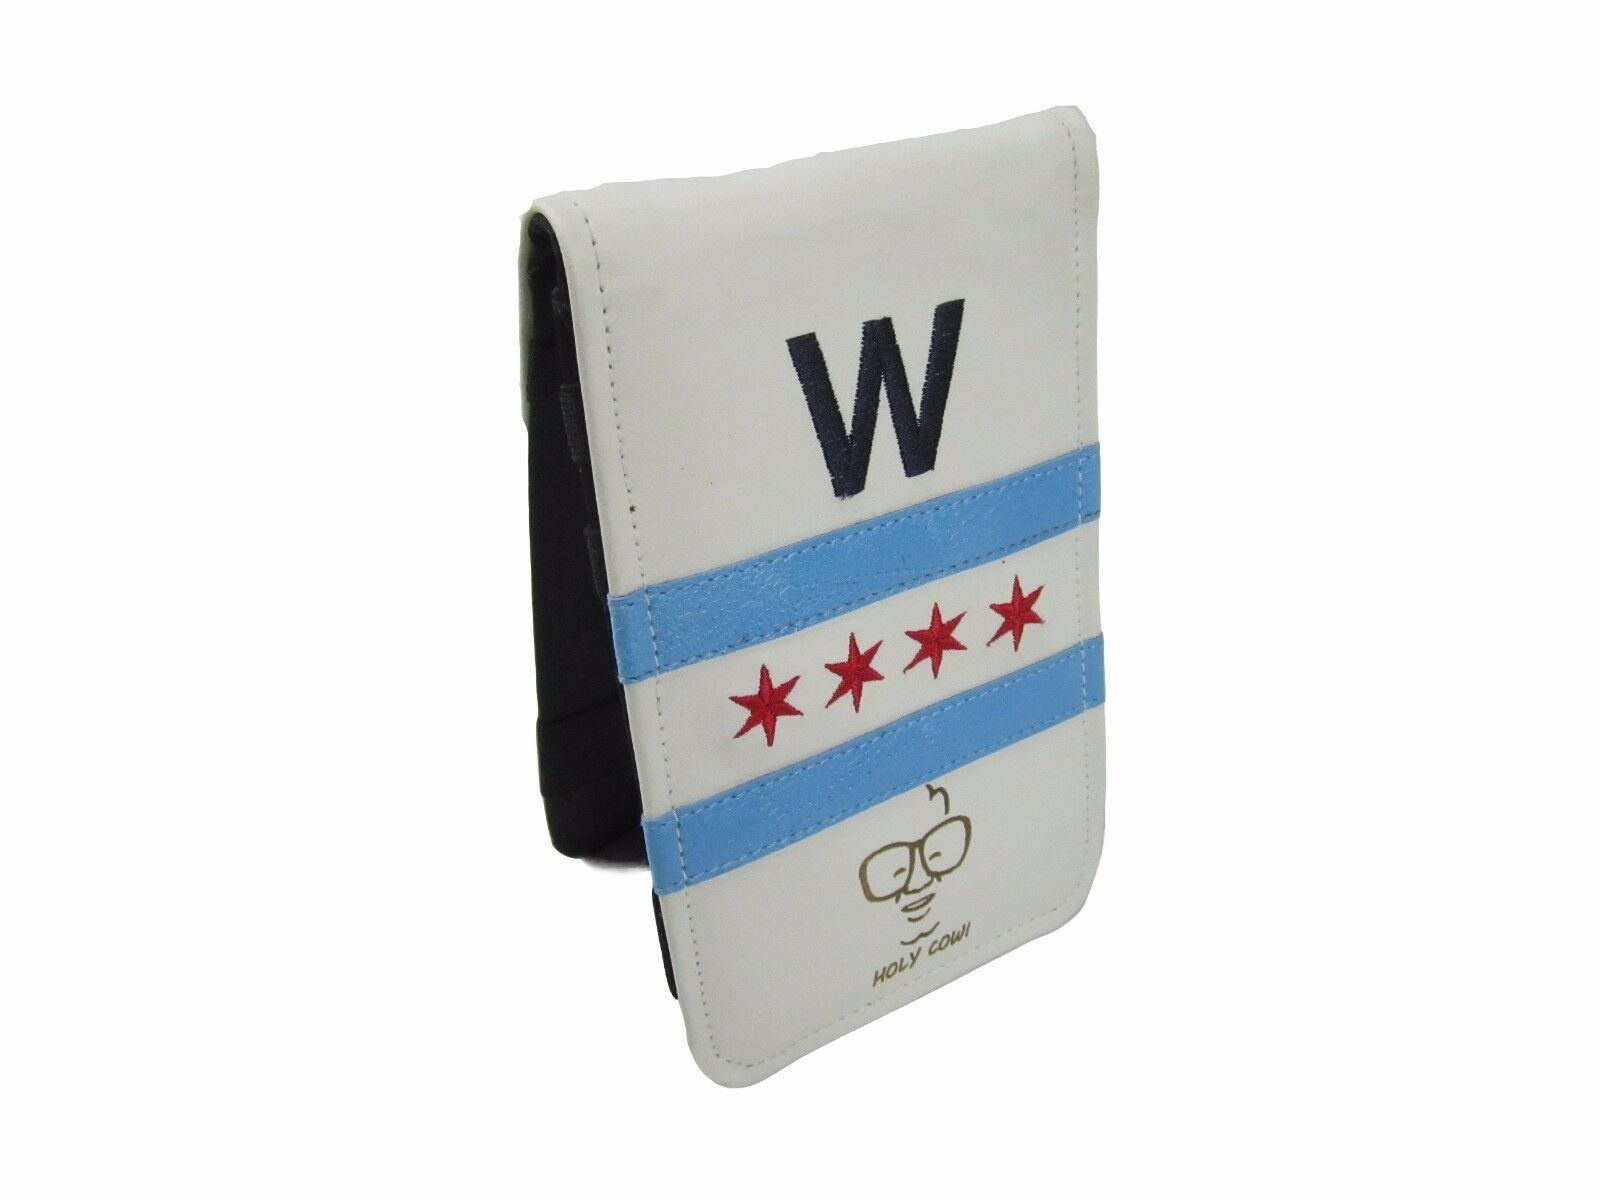 Sunfish Leather golf Scorecard Holder Cubs World Series - FLY THE W